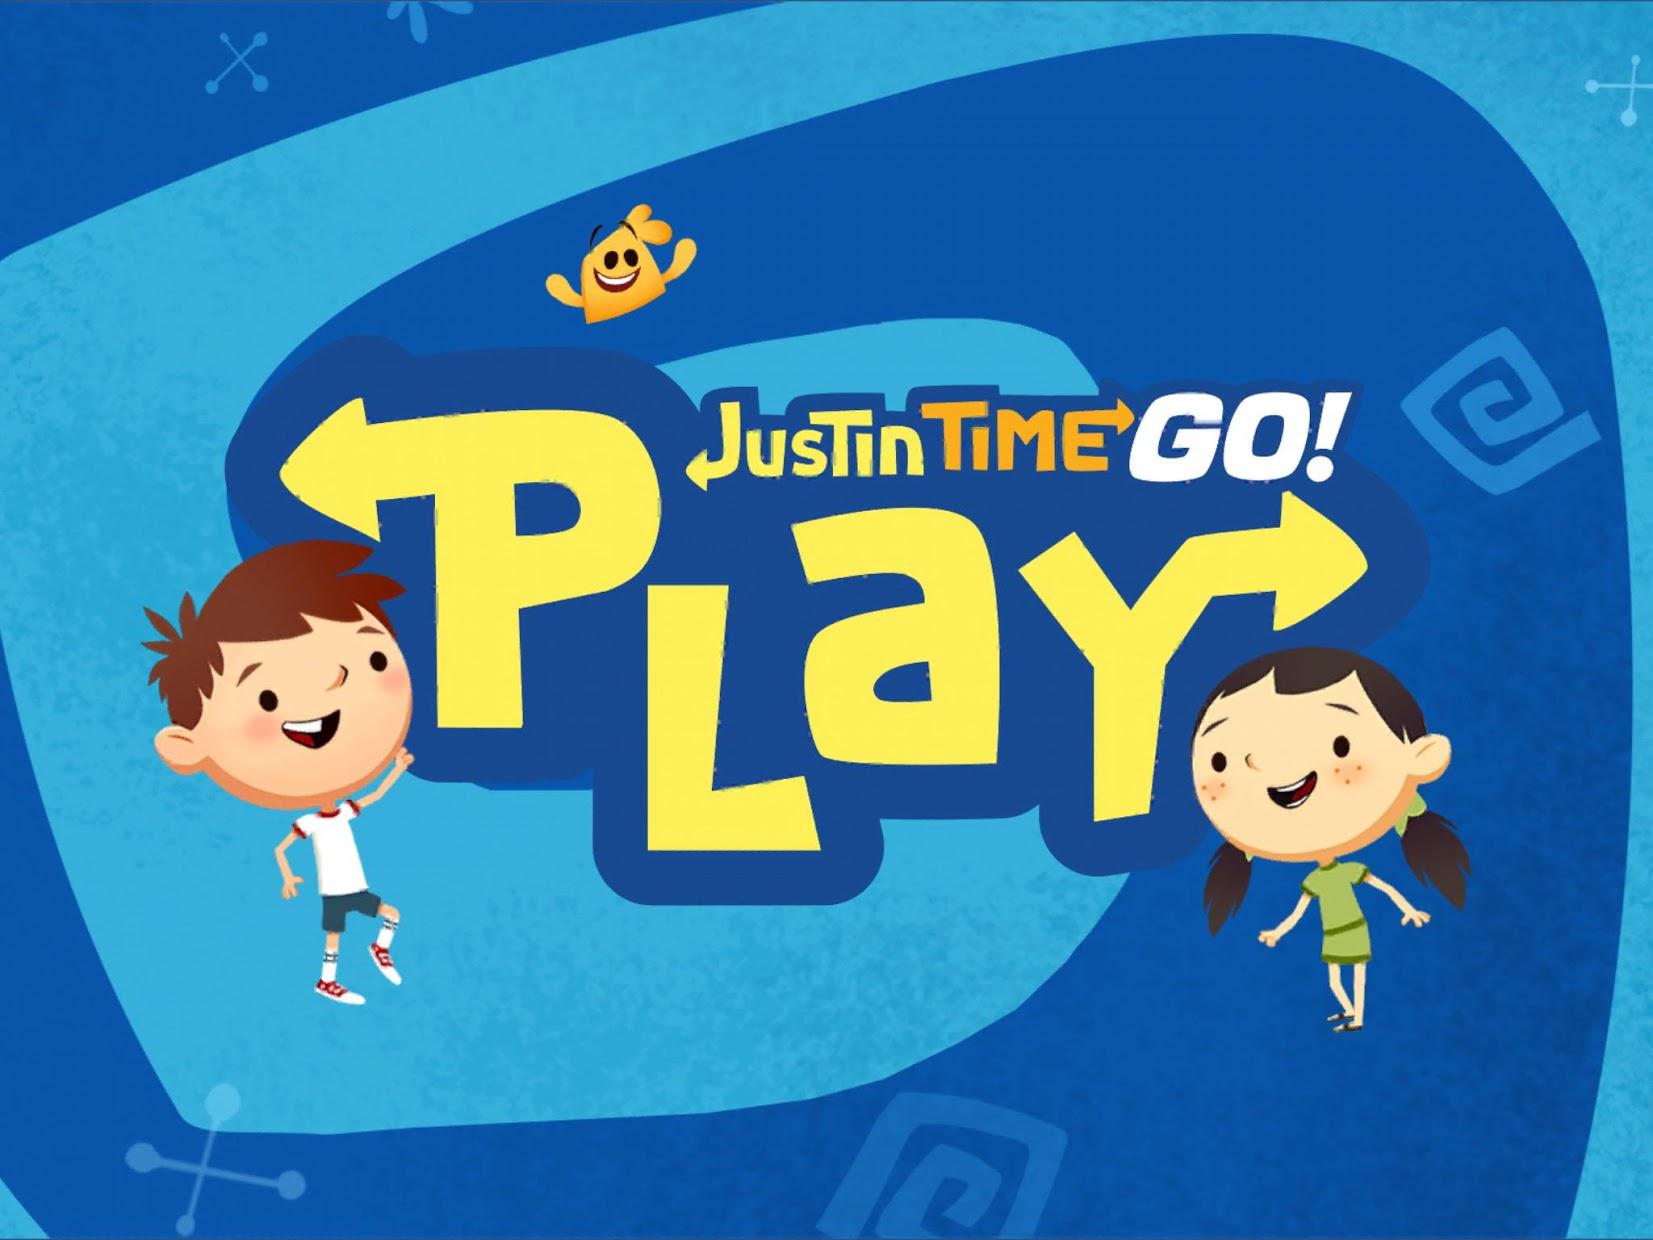 Justin Time GO PLAY!